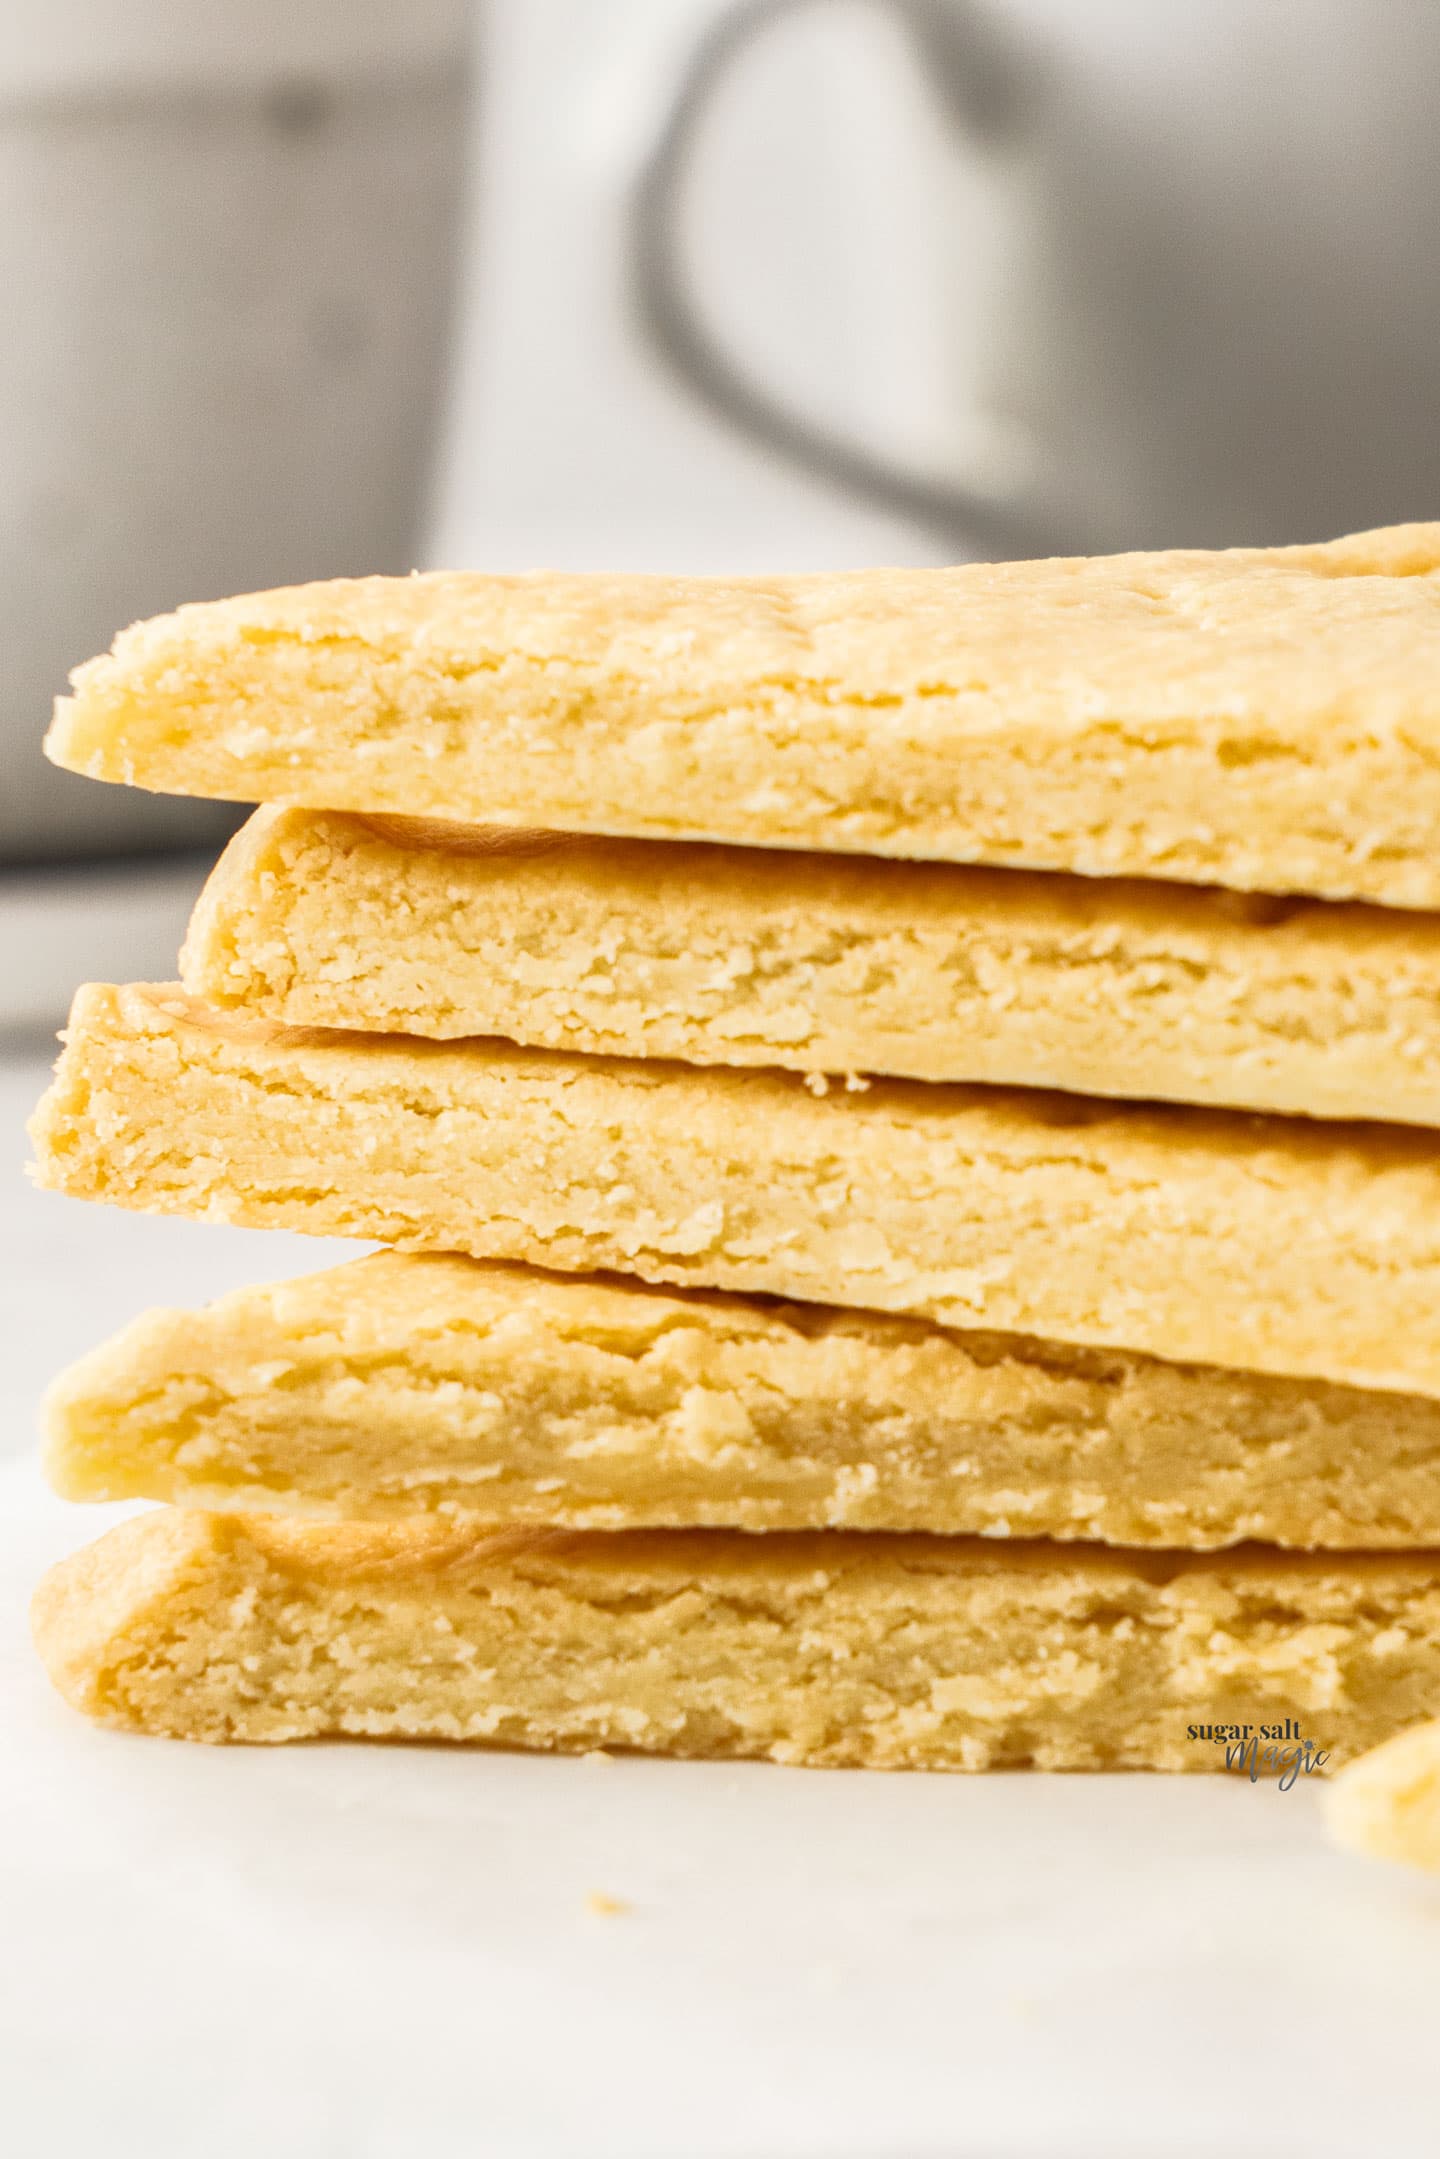 A stack of butter shortbread showing the texture.